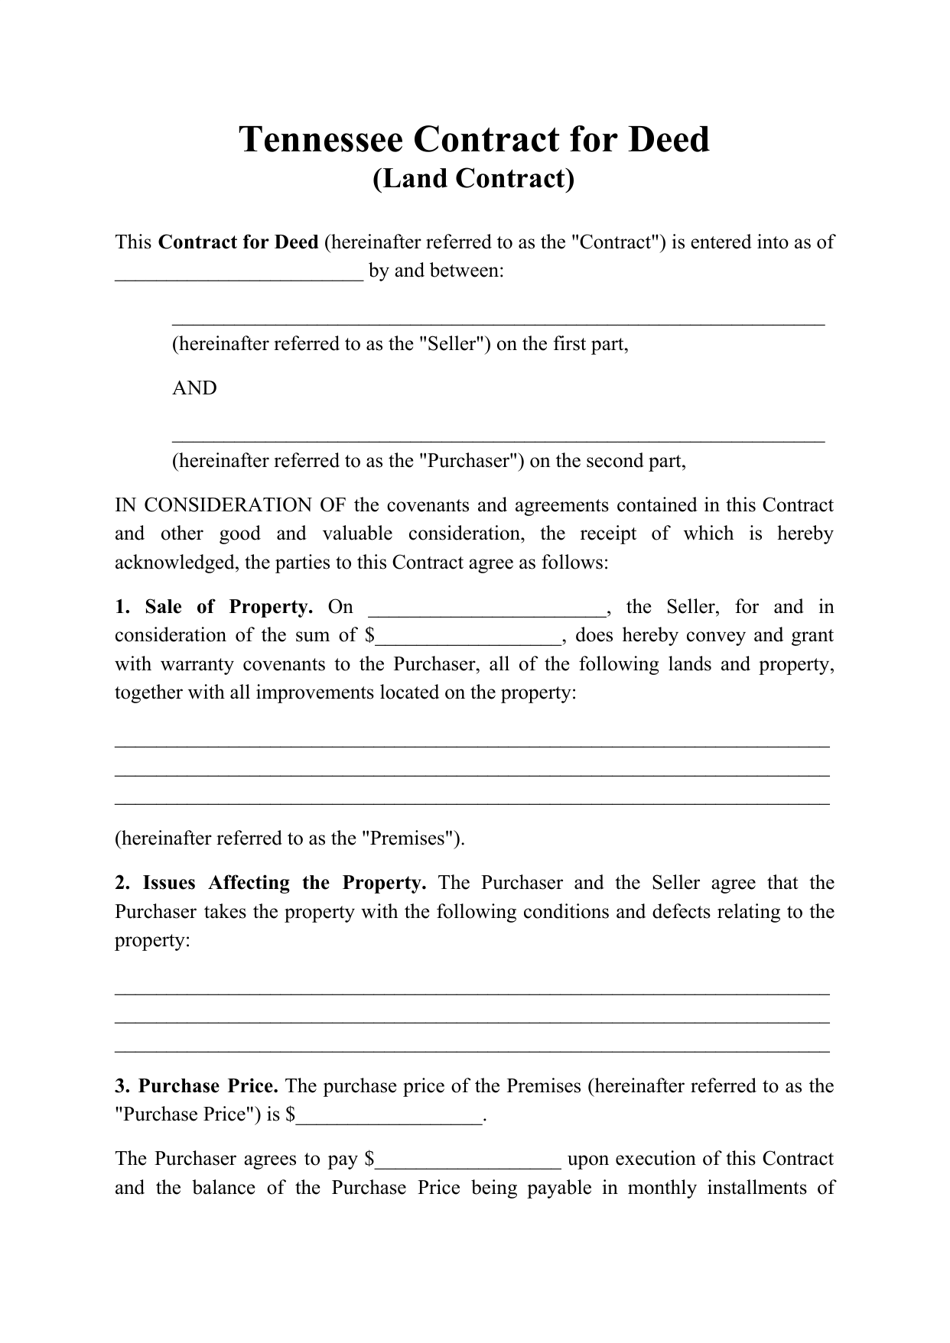 Contract for Deed (Land Contract) - Tennessee, Page 1